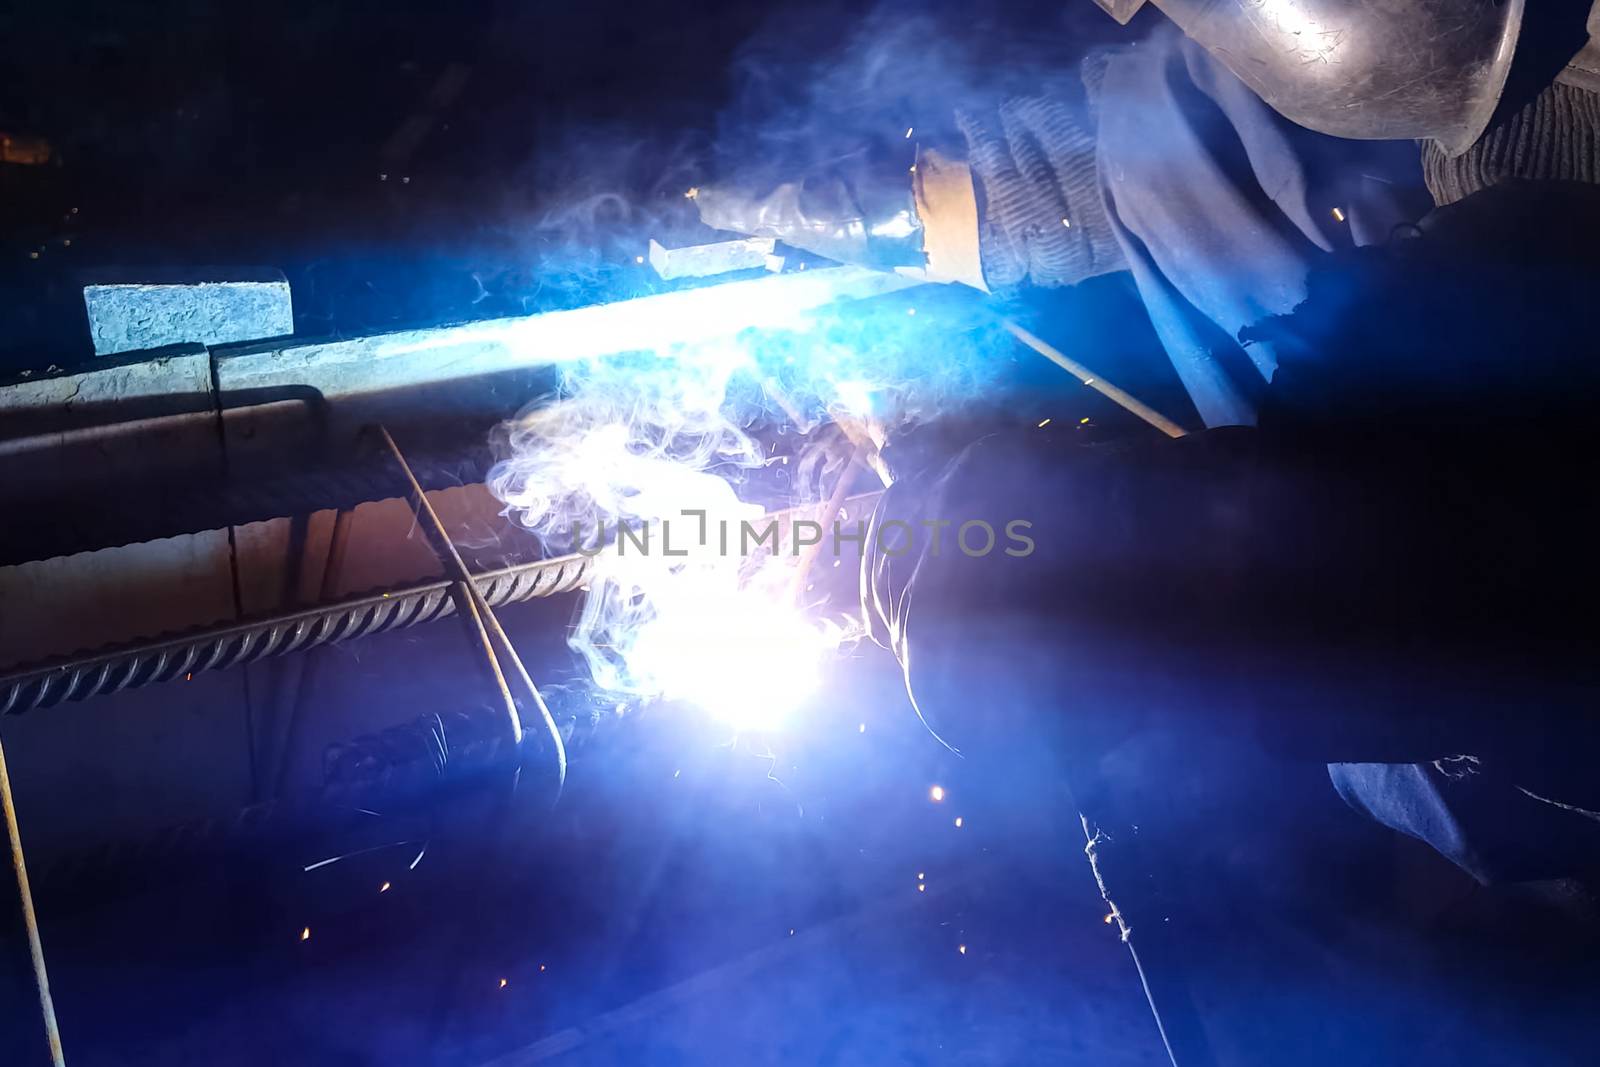 Welding of steel reinforcement. Sparks and light from welding. E by nyrok